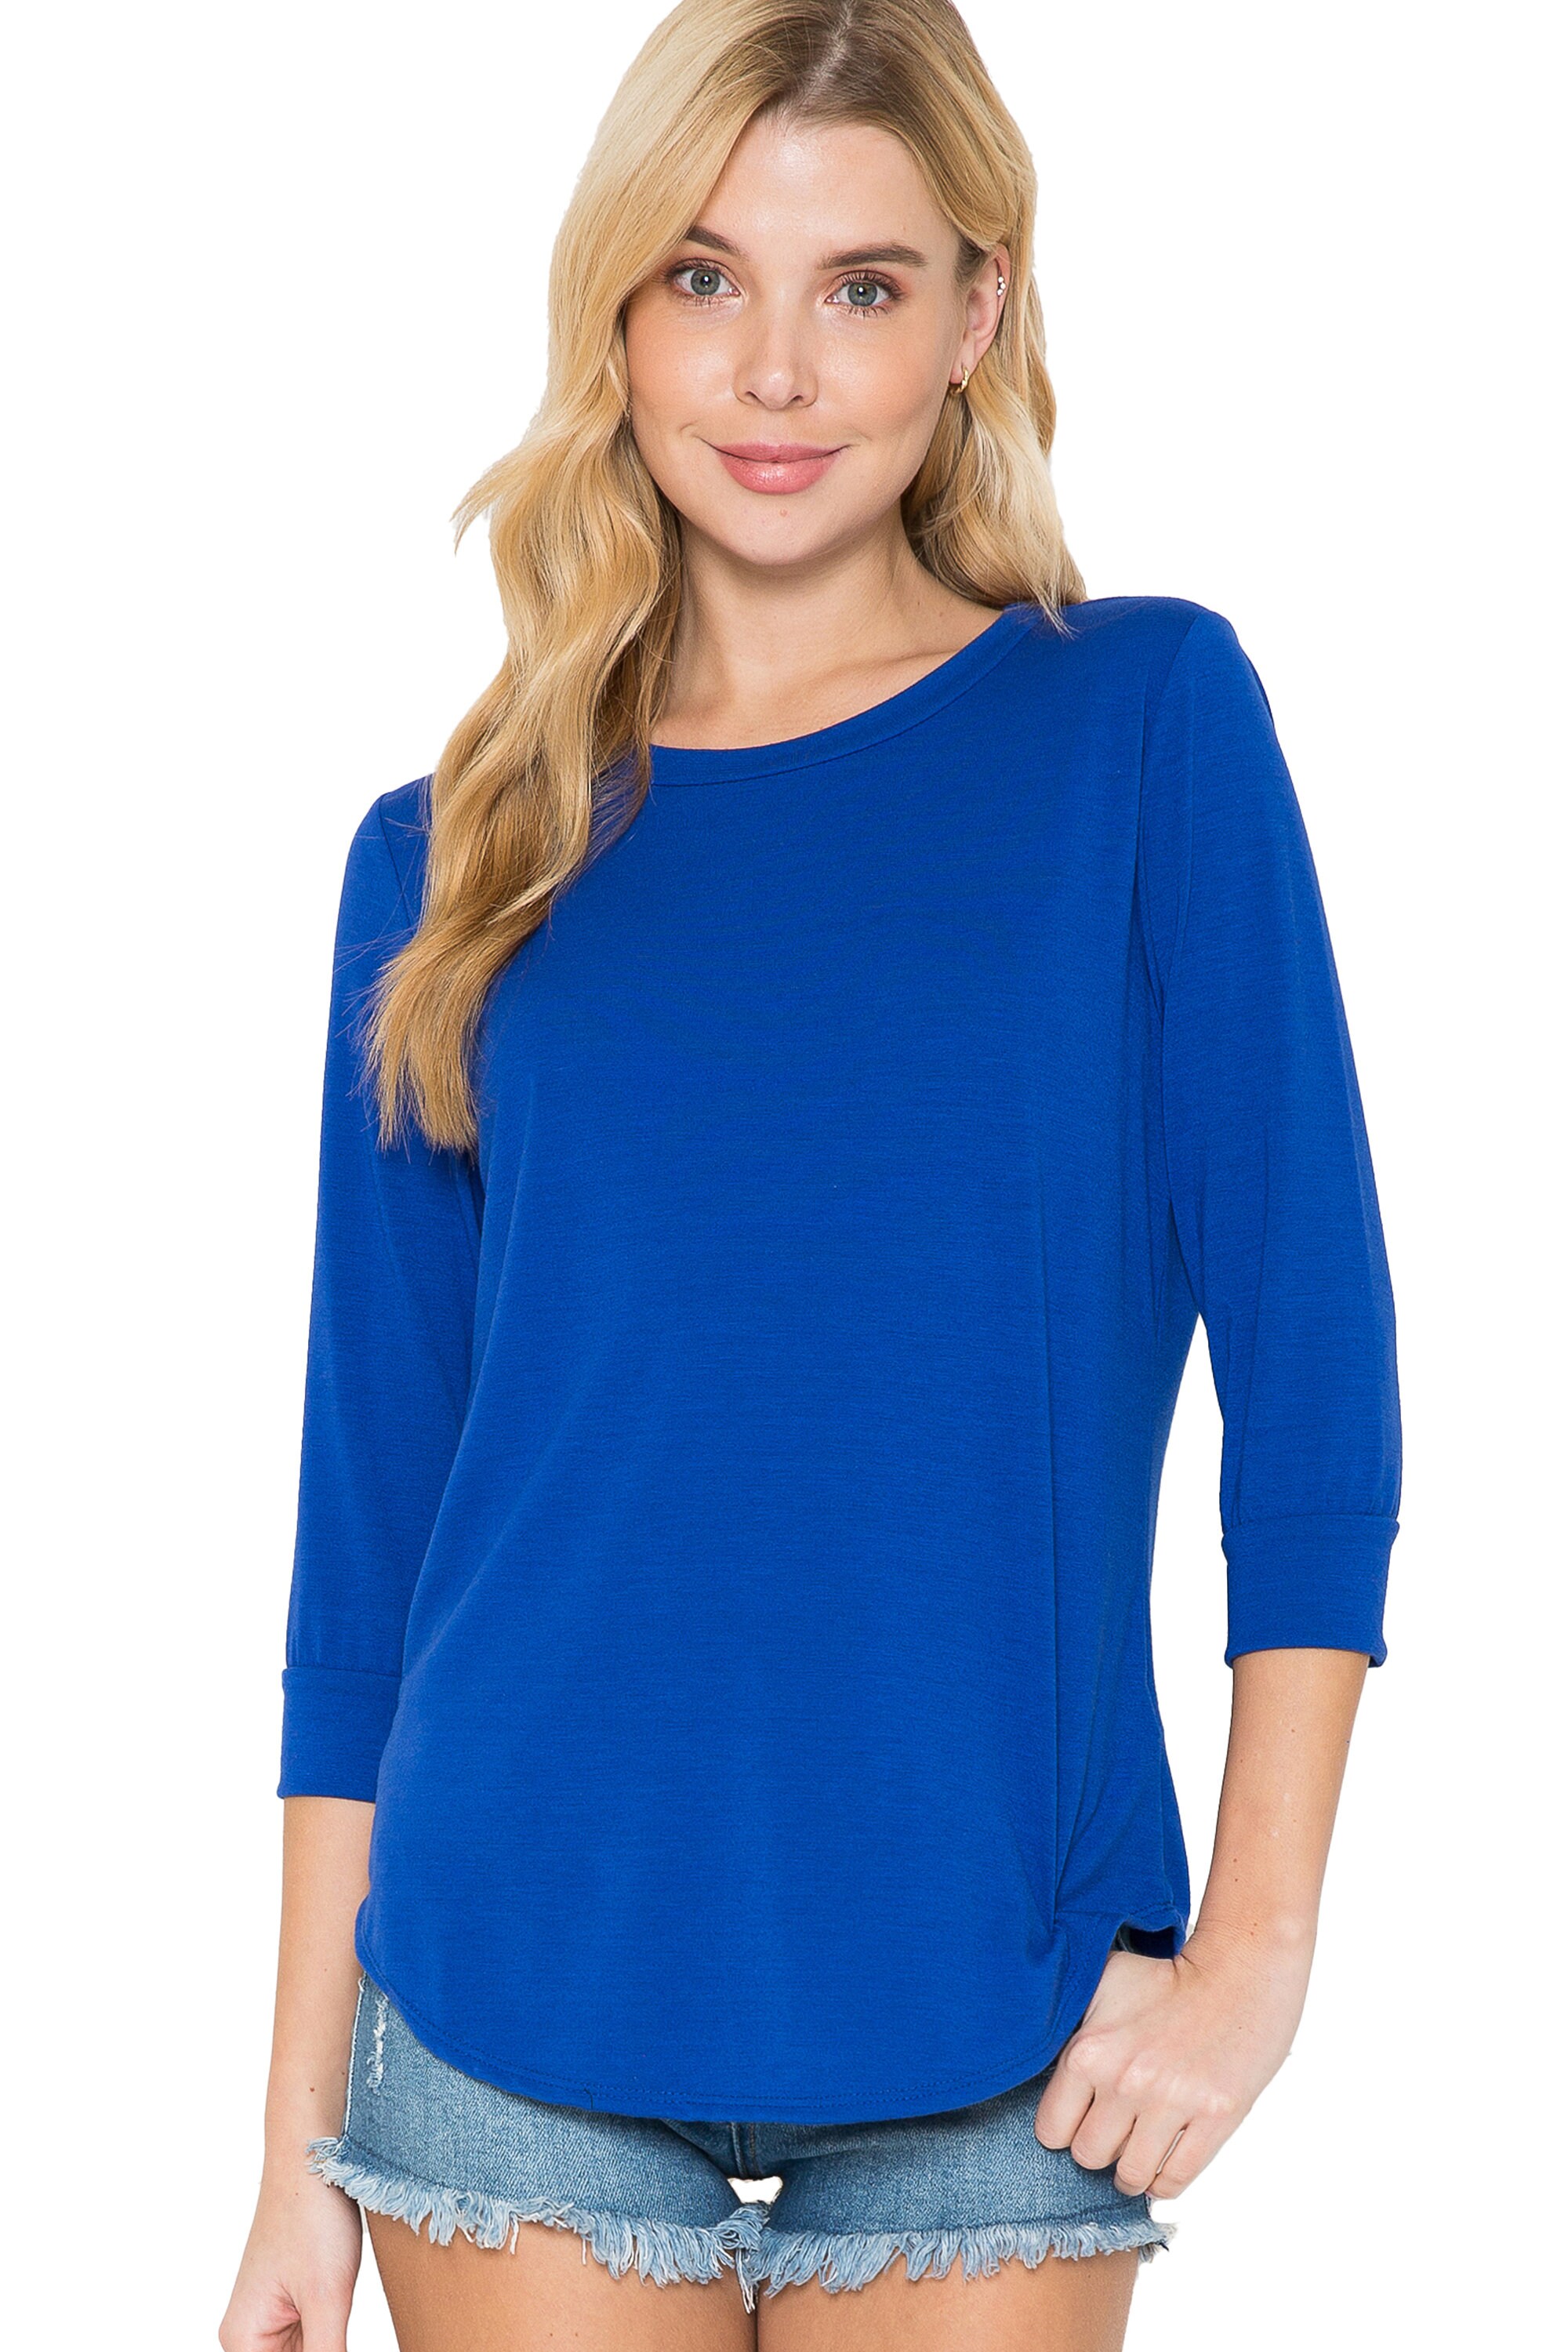 Solid Color 3/4 Sleeve Tops, Women's 3/4 Sleeve Solid T-shirt, Three ...